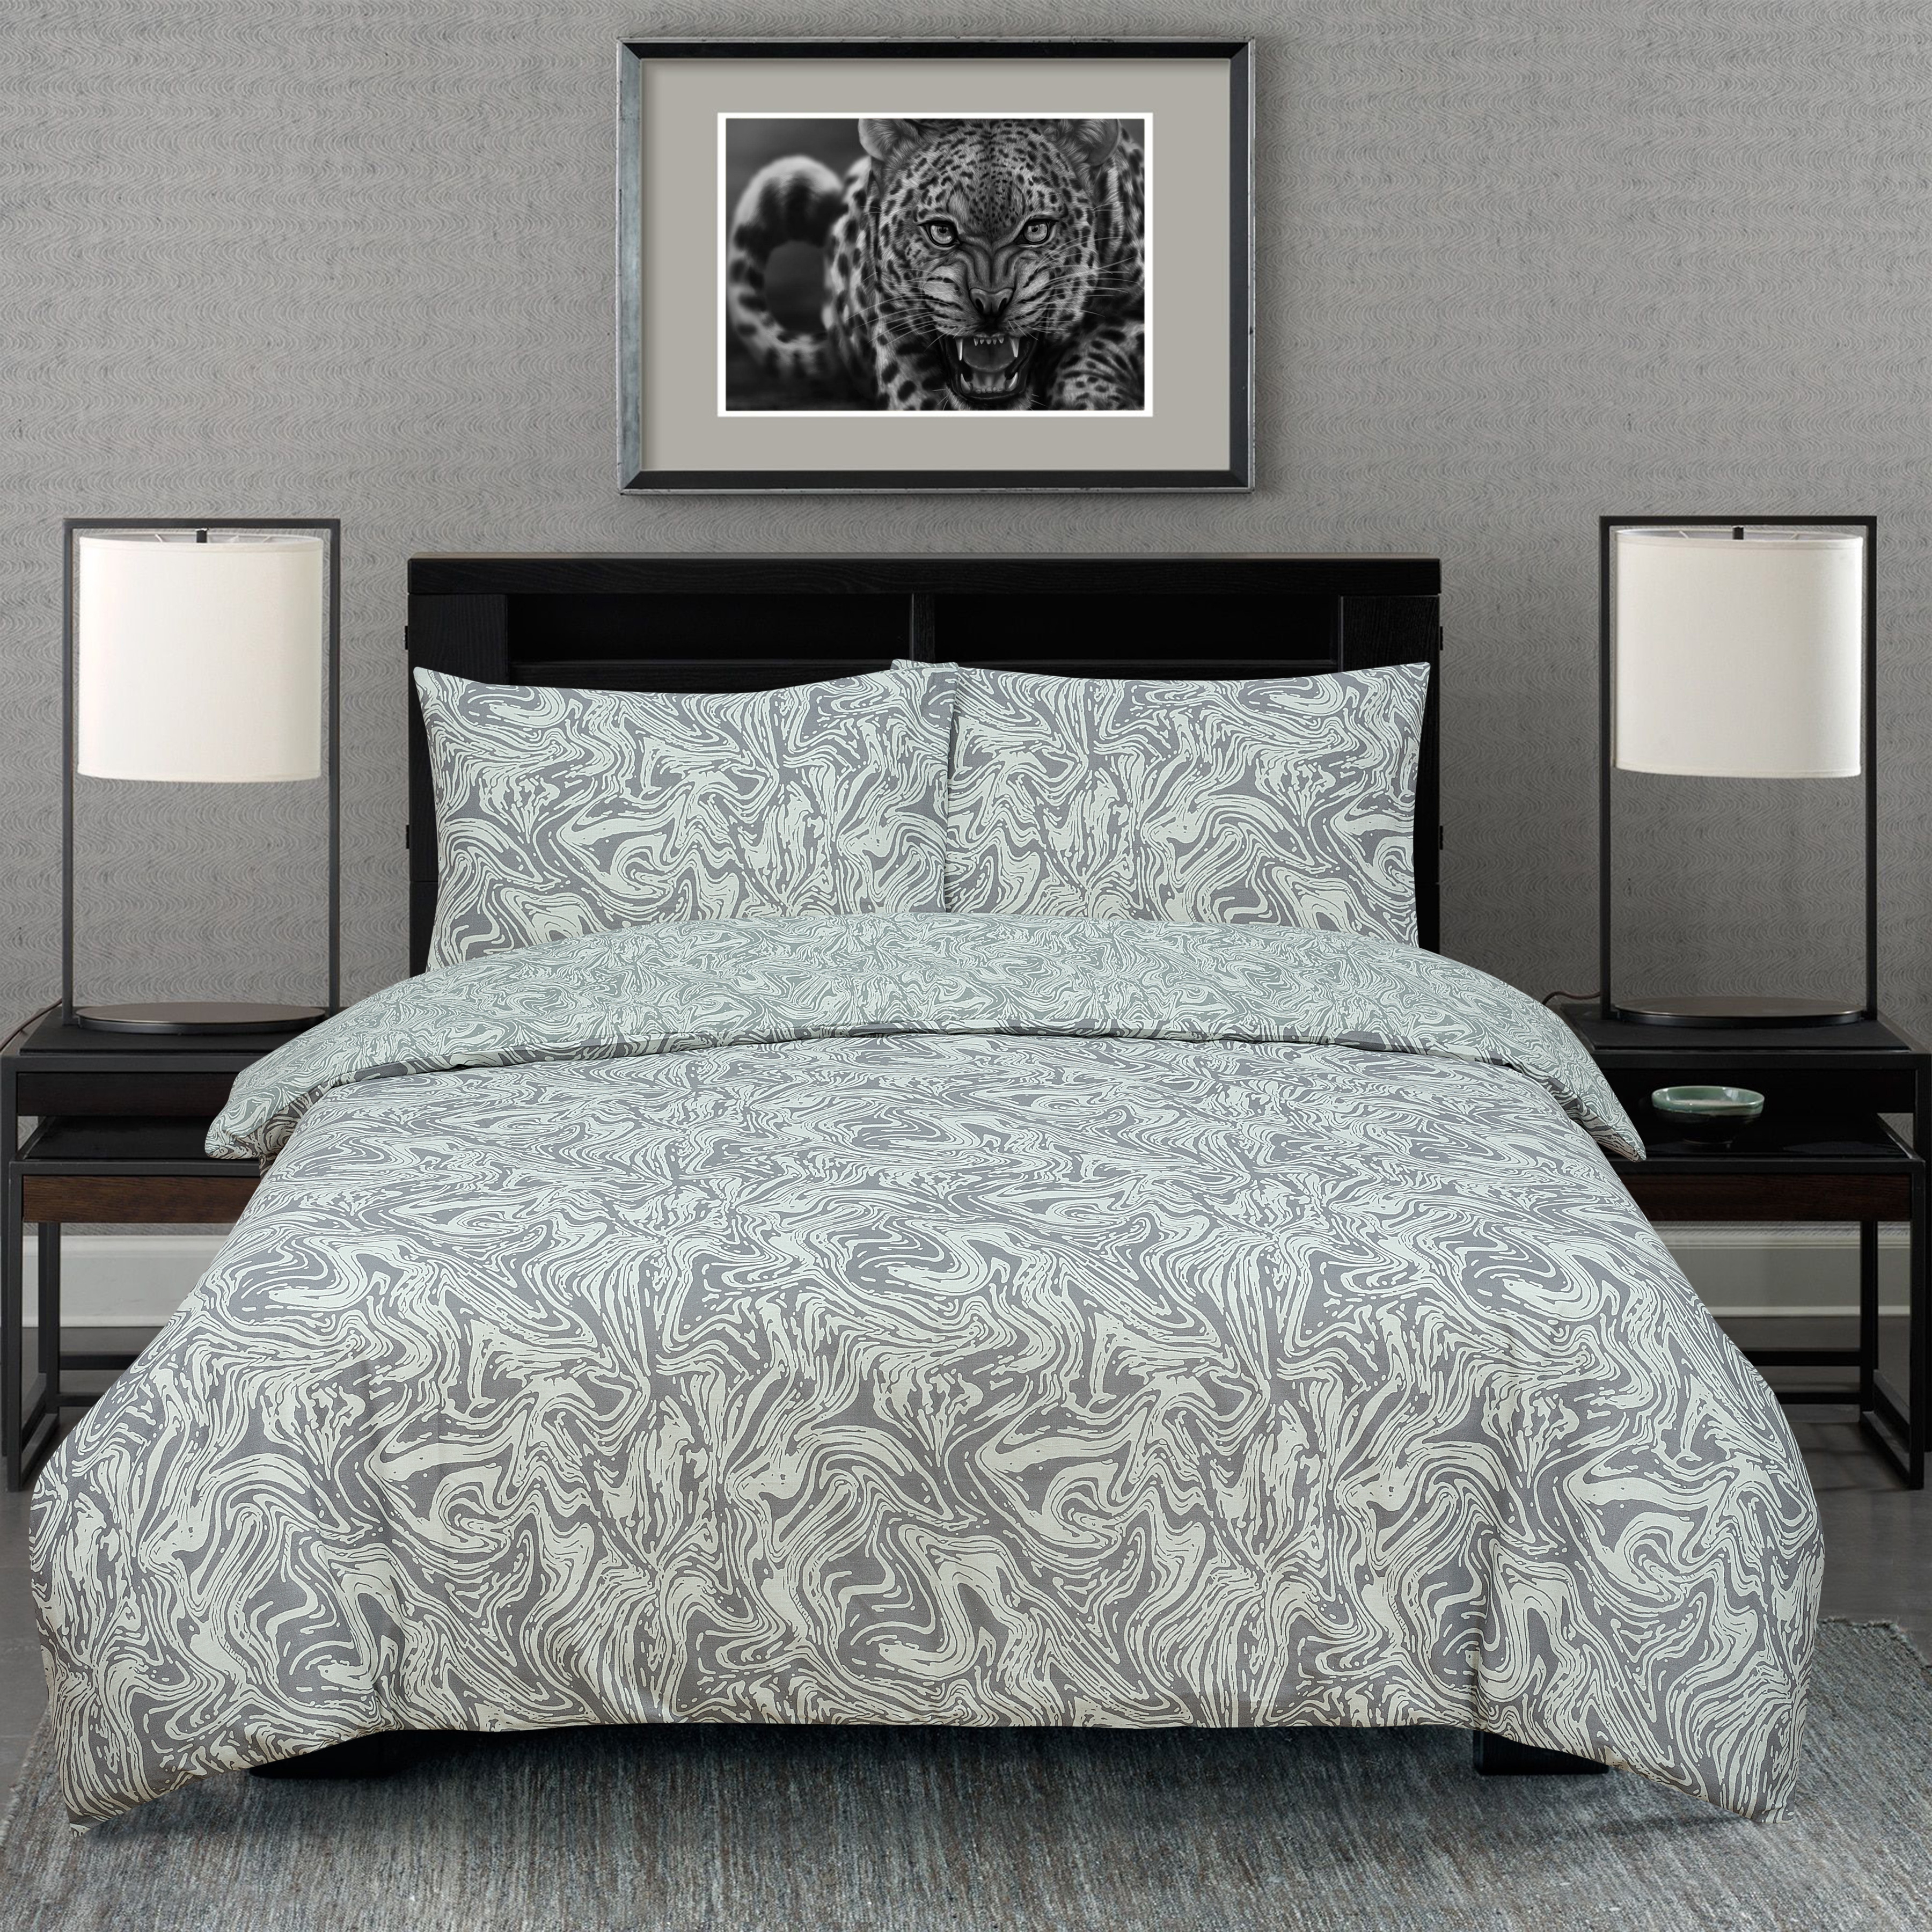 Marble Silver Reversible Rotary King Bed Duvet Quilt Cover Set